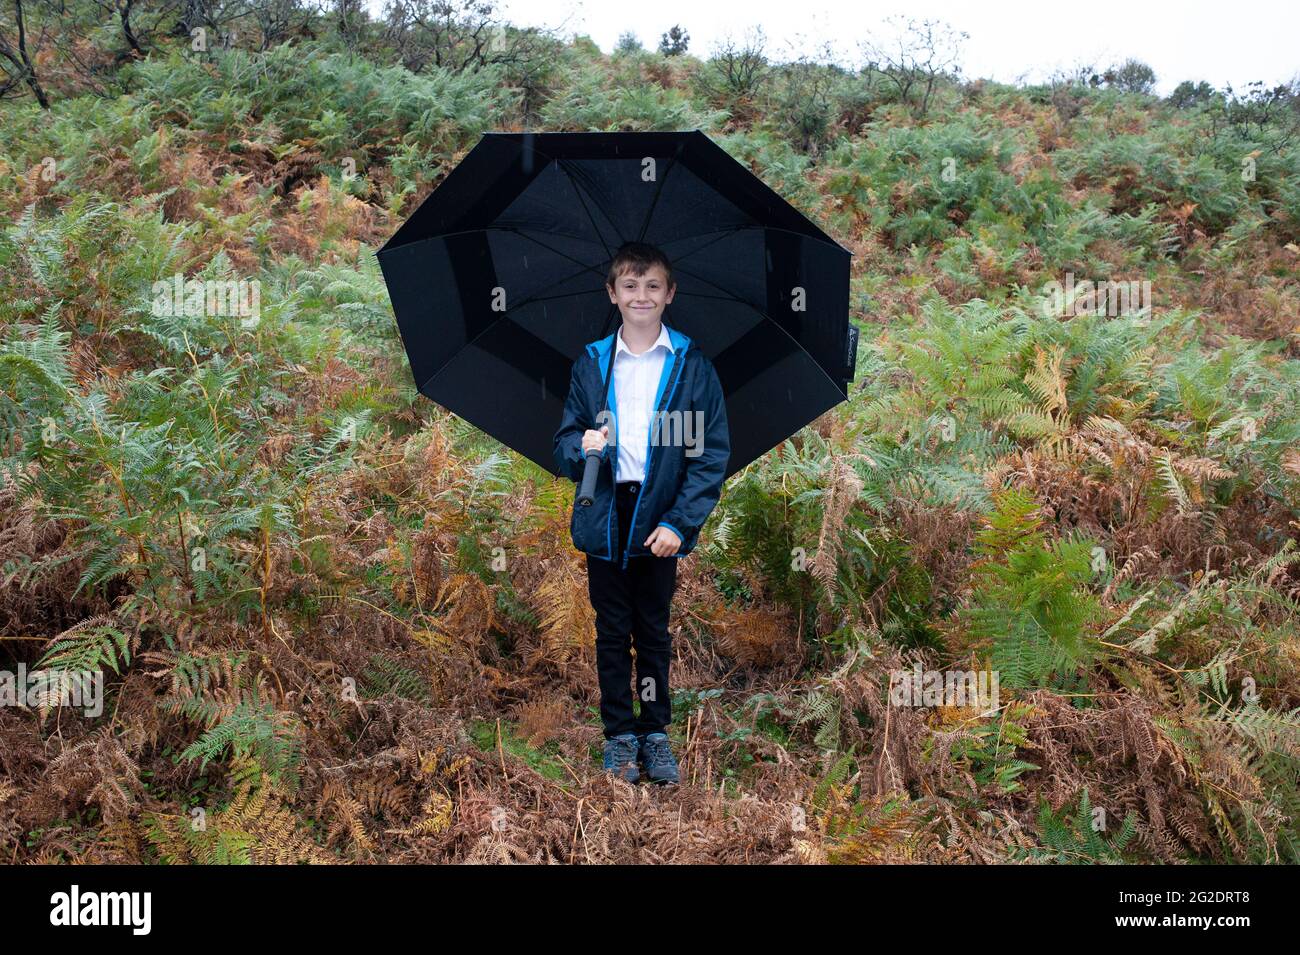 A young boy stands in the rain holding a big umbrella in the New Forest. Stock Photo